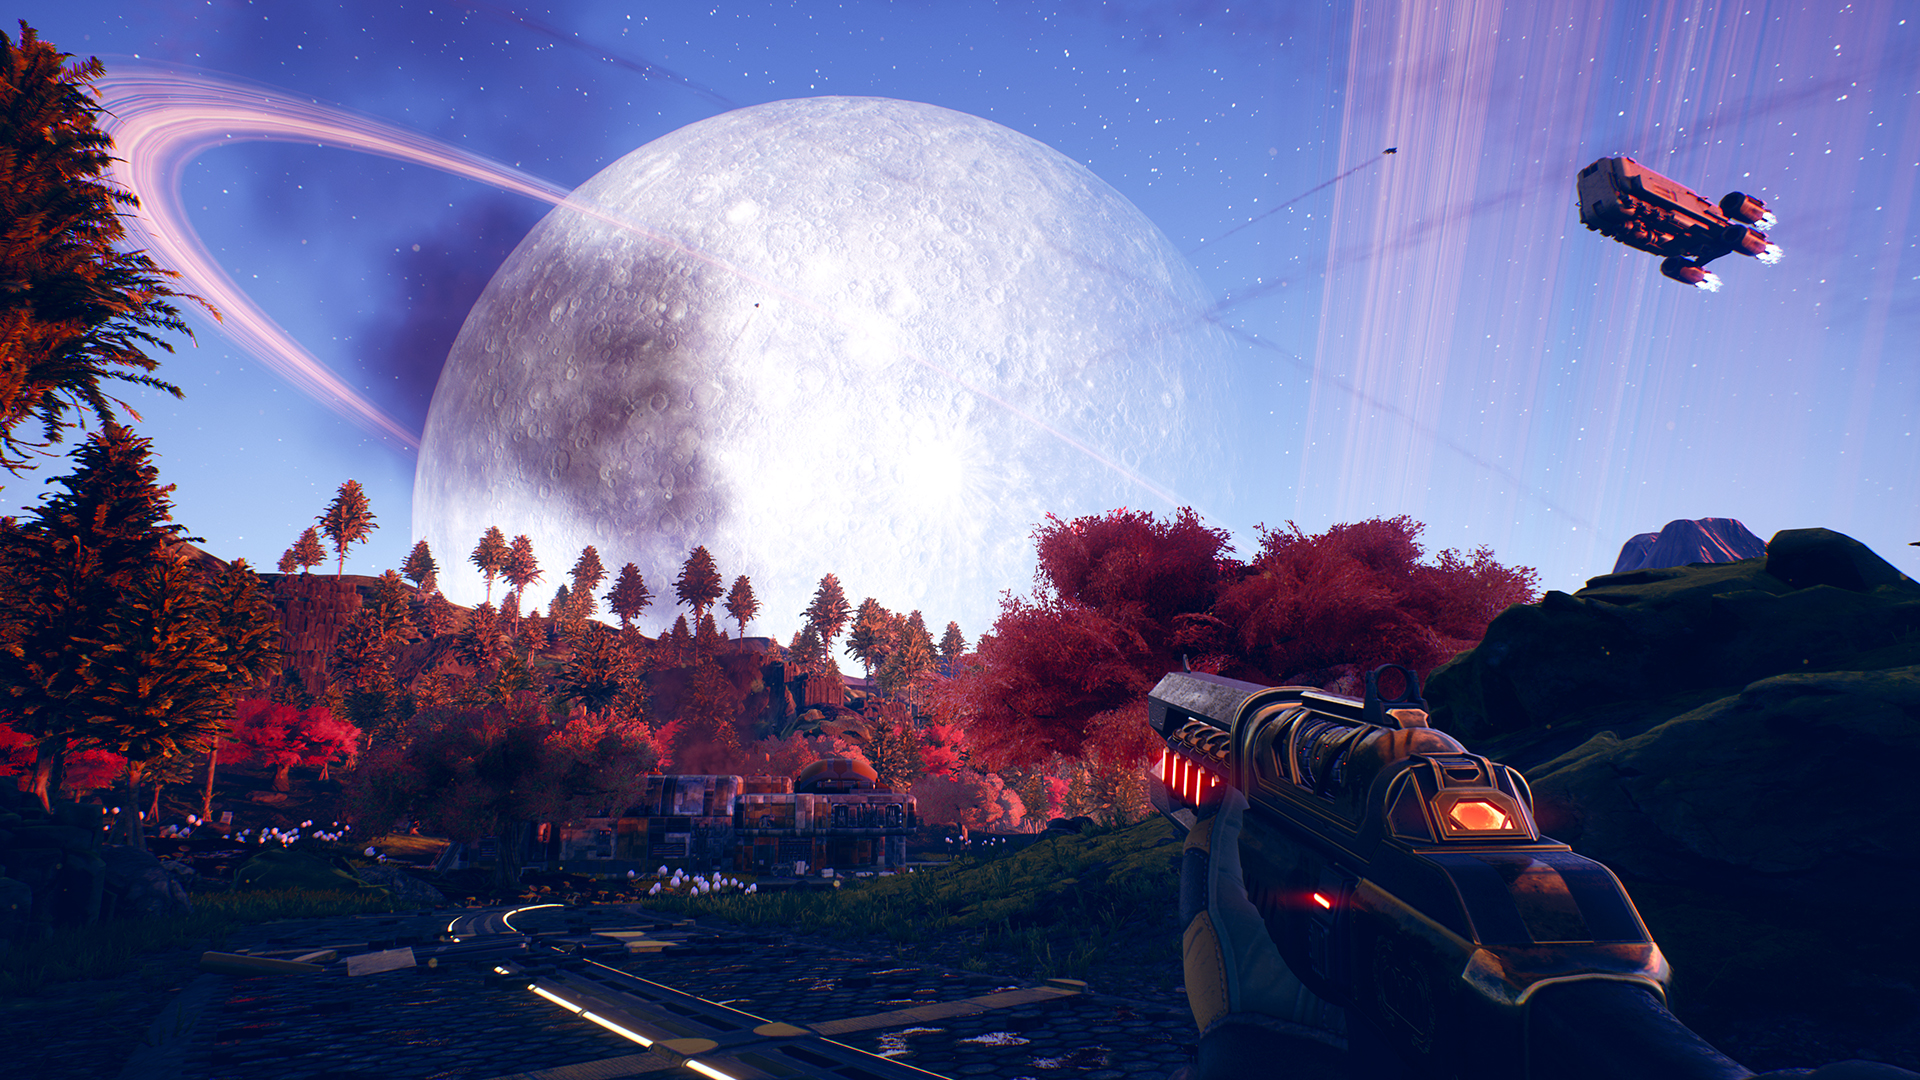 The Outer Worlds, PC - Epic